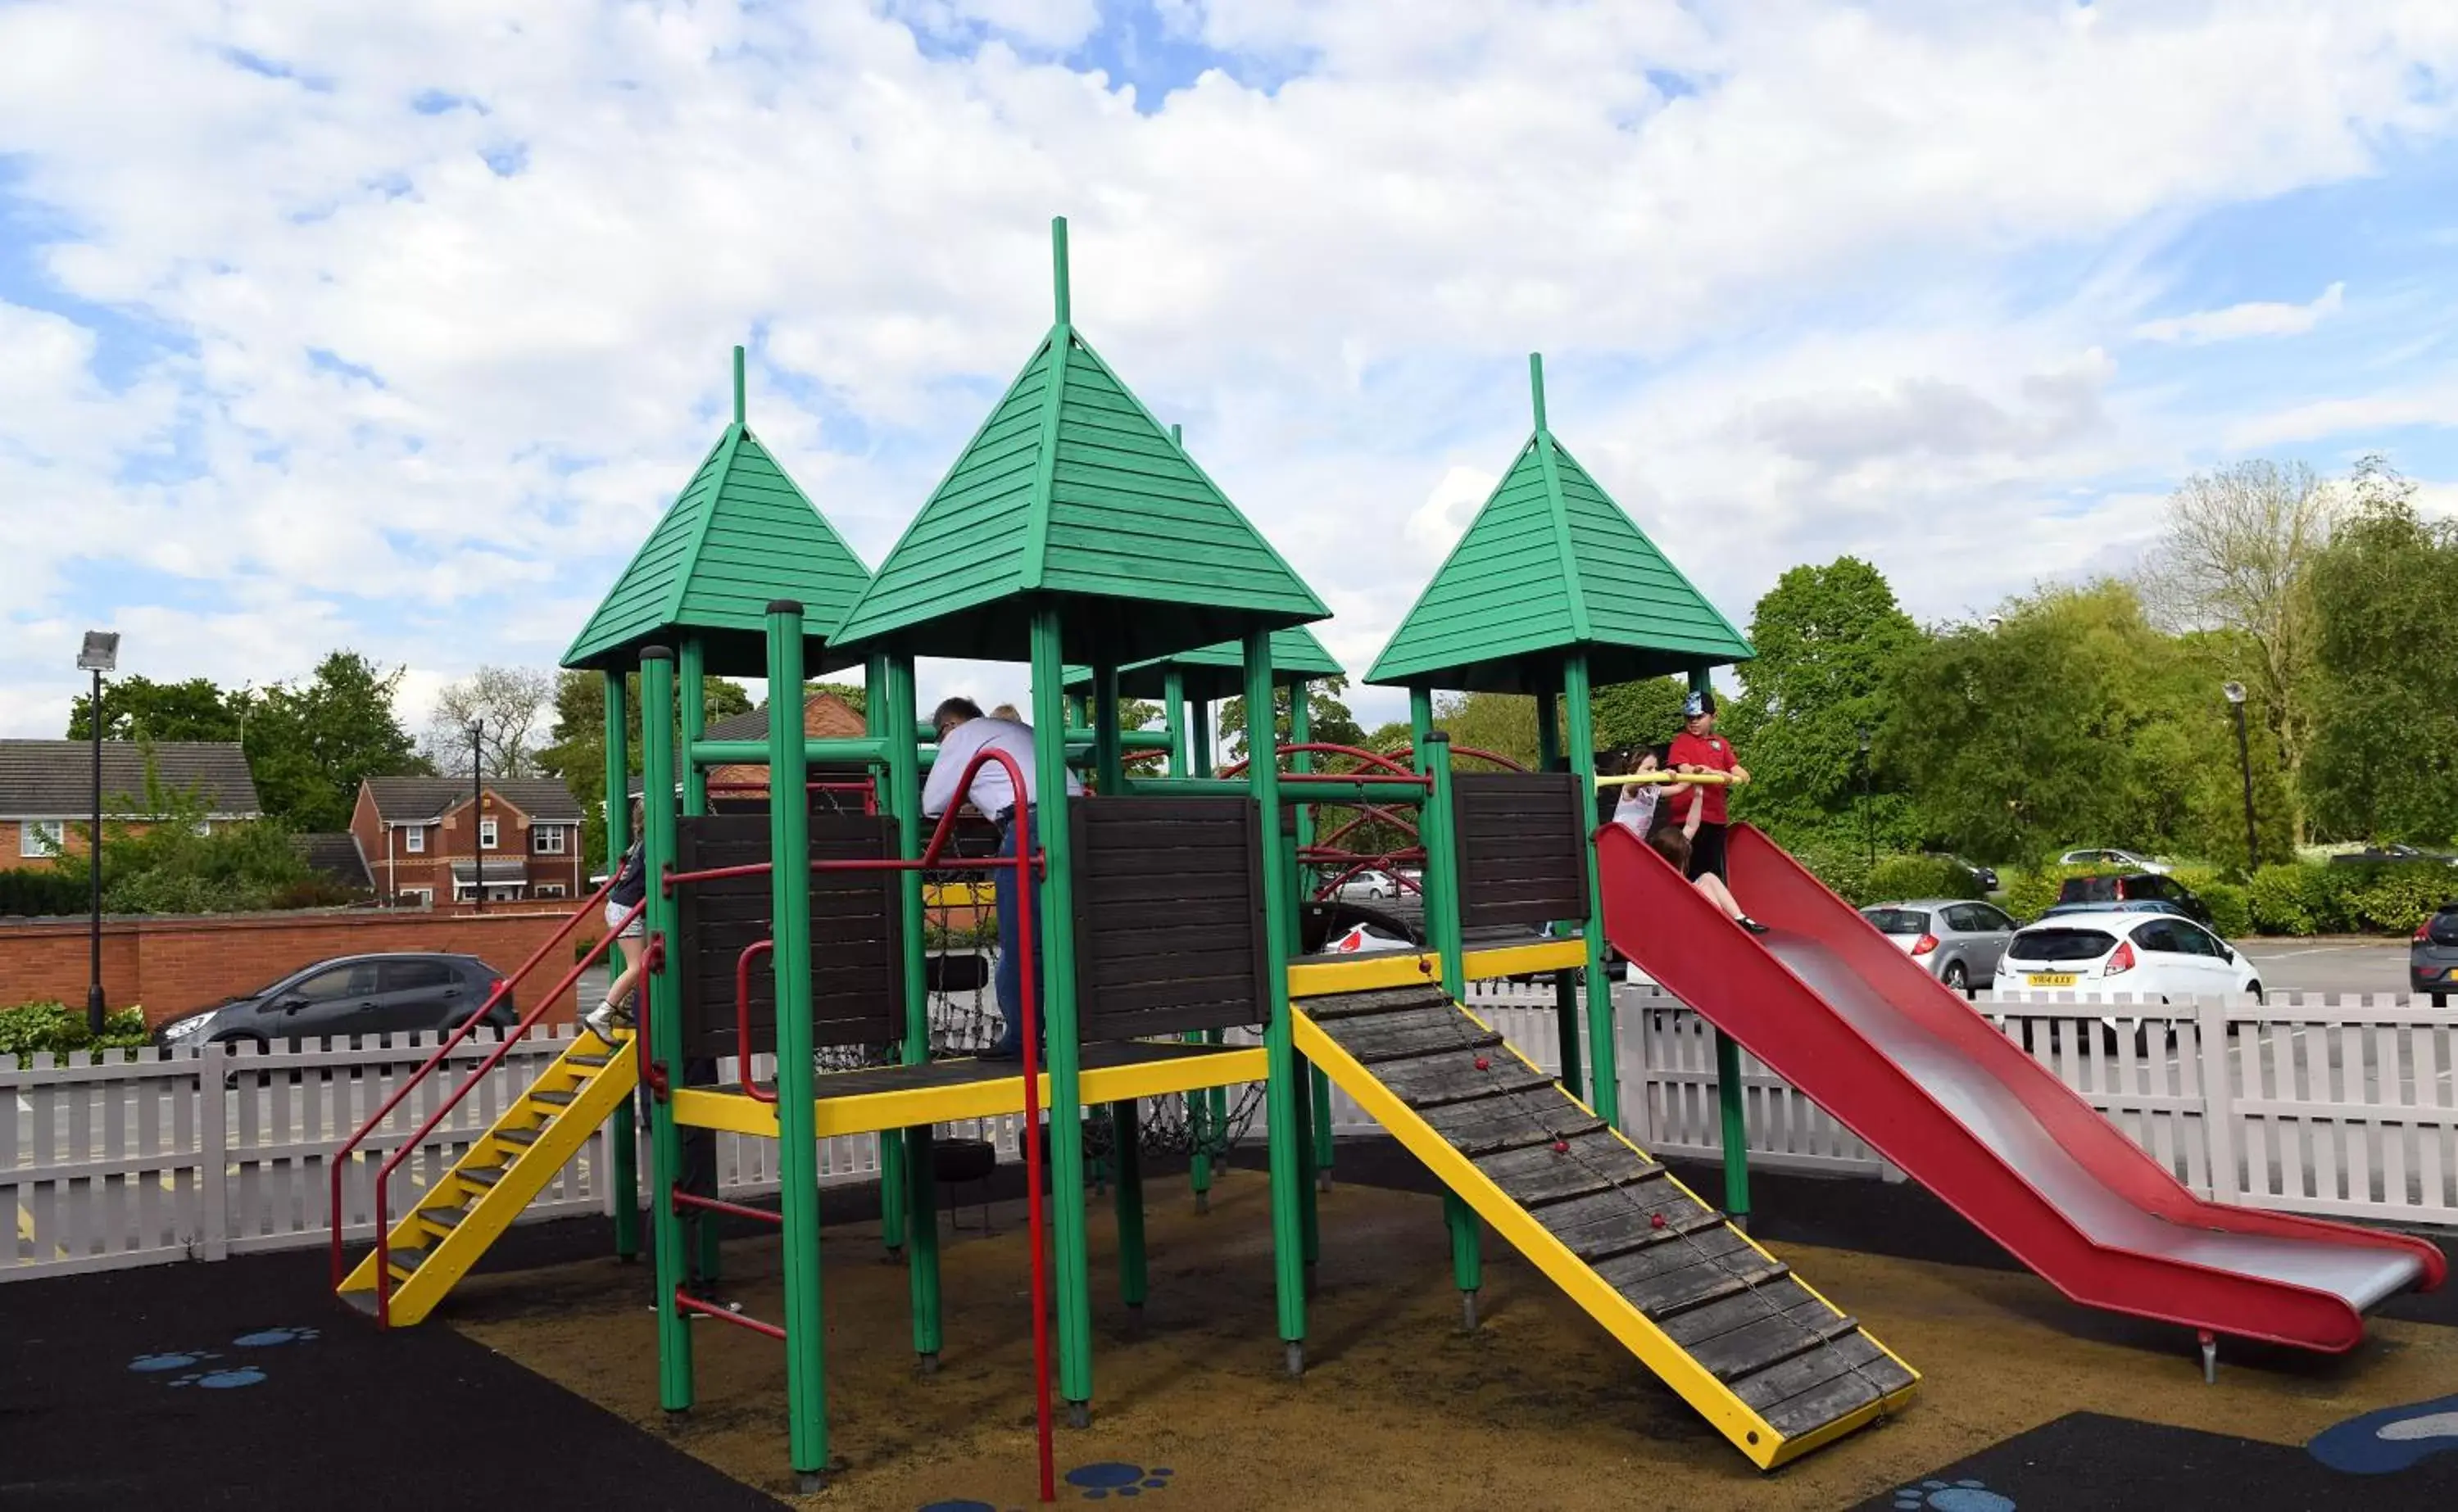 Children play ground, Children's Play Area in Olde House, Chesterfield by Marston's Inns